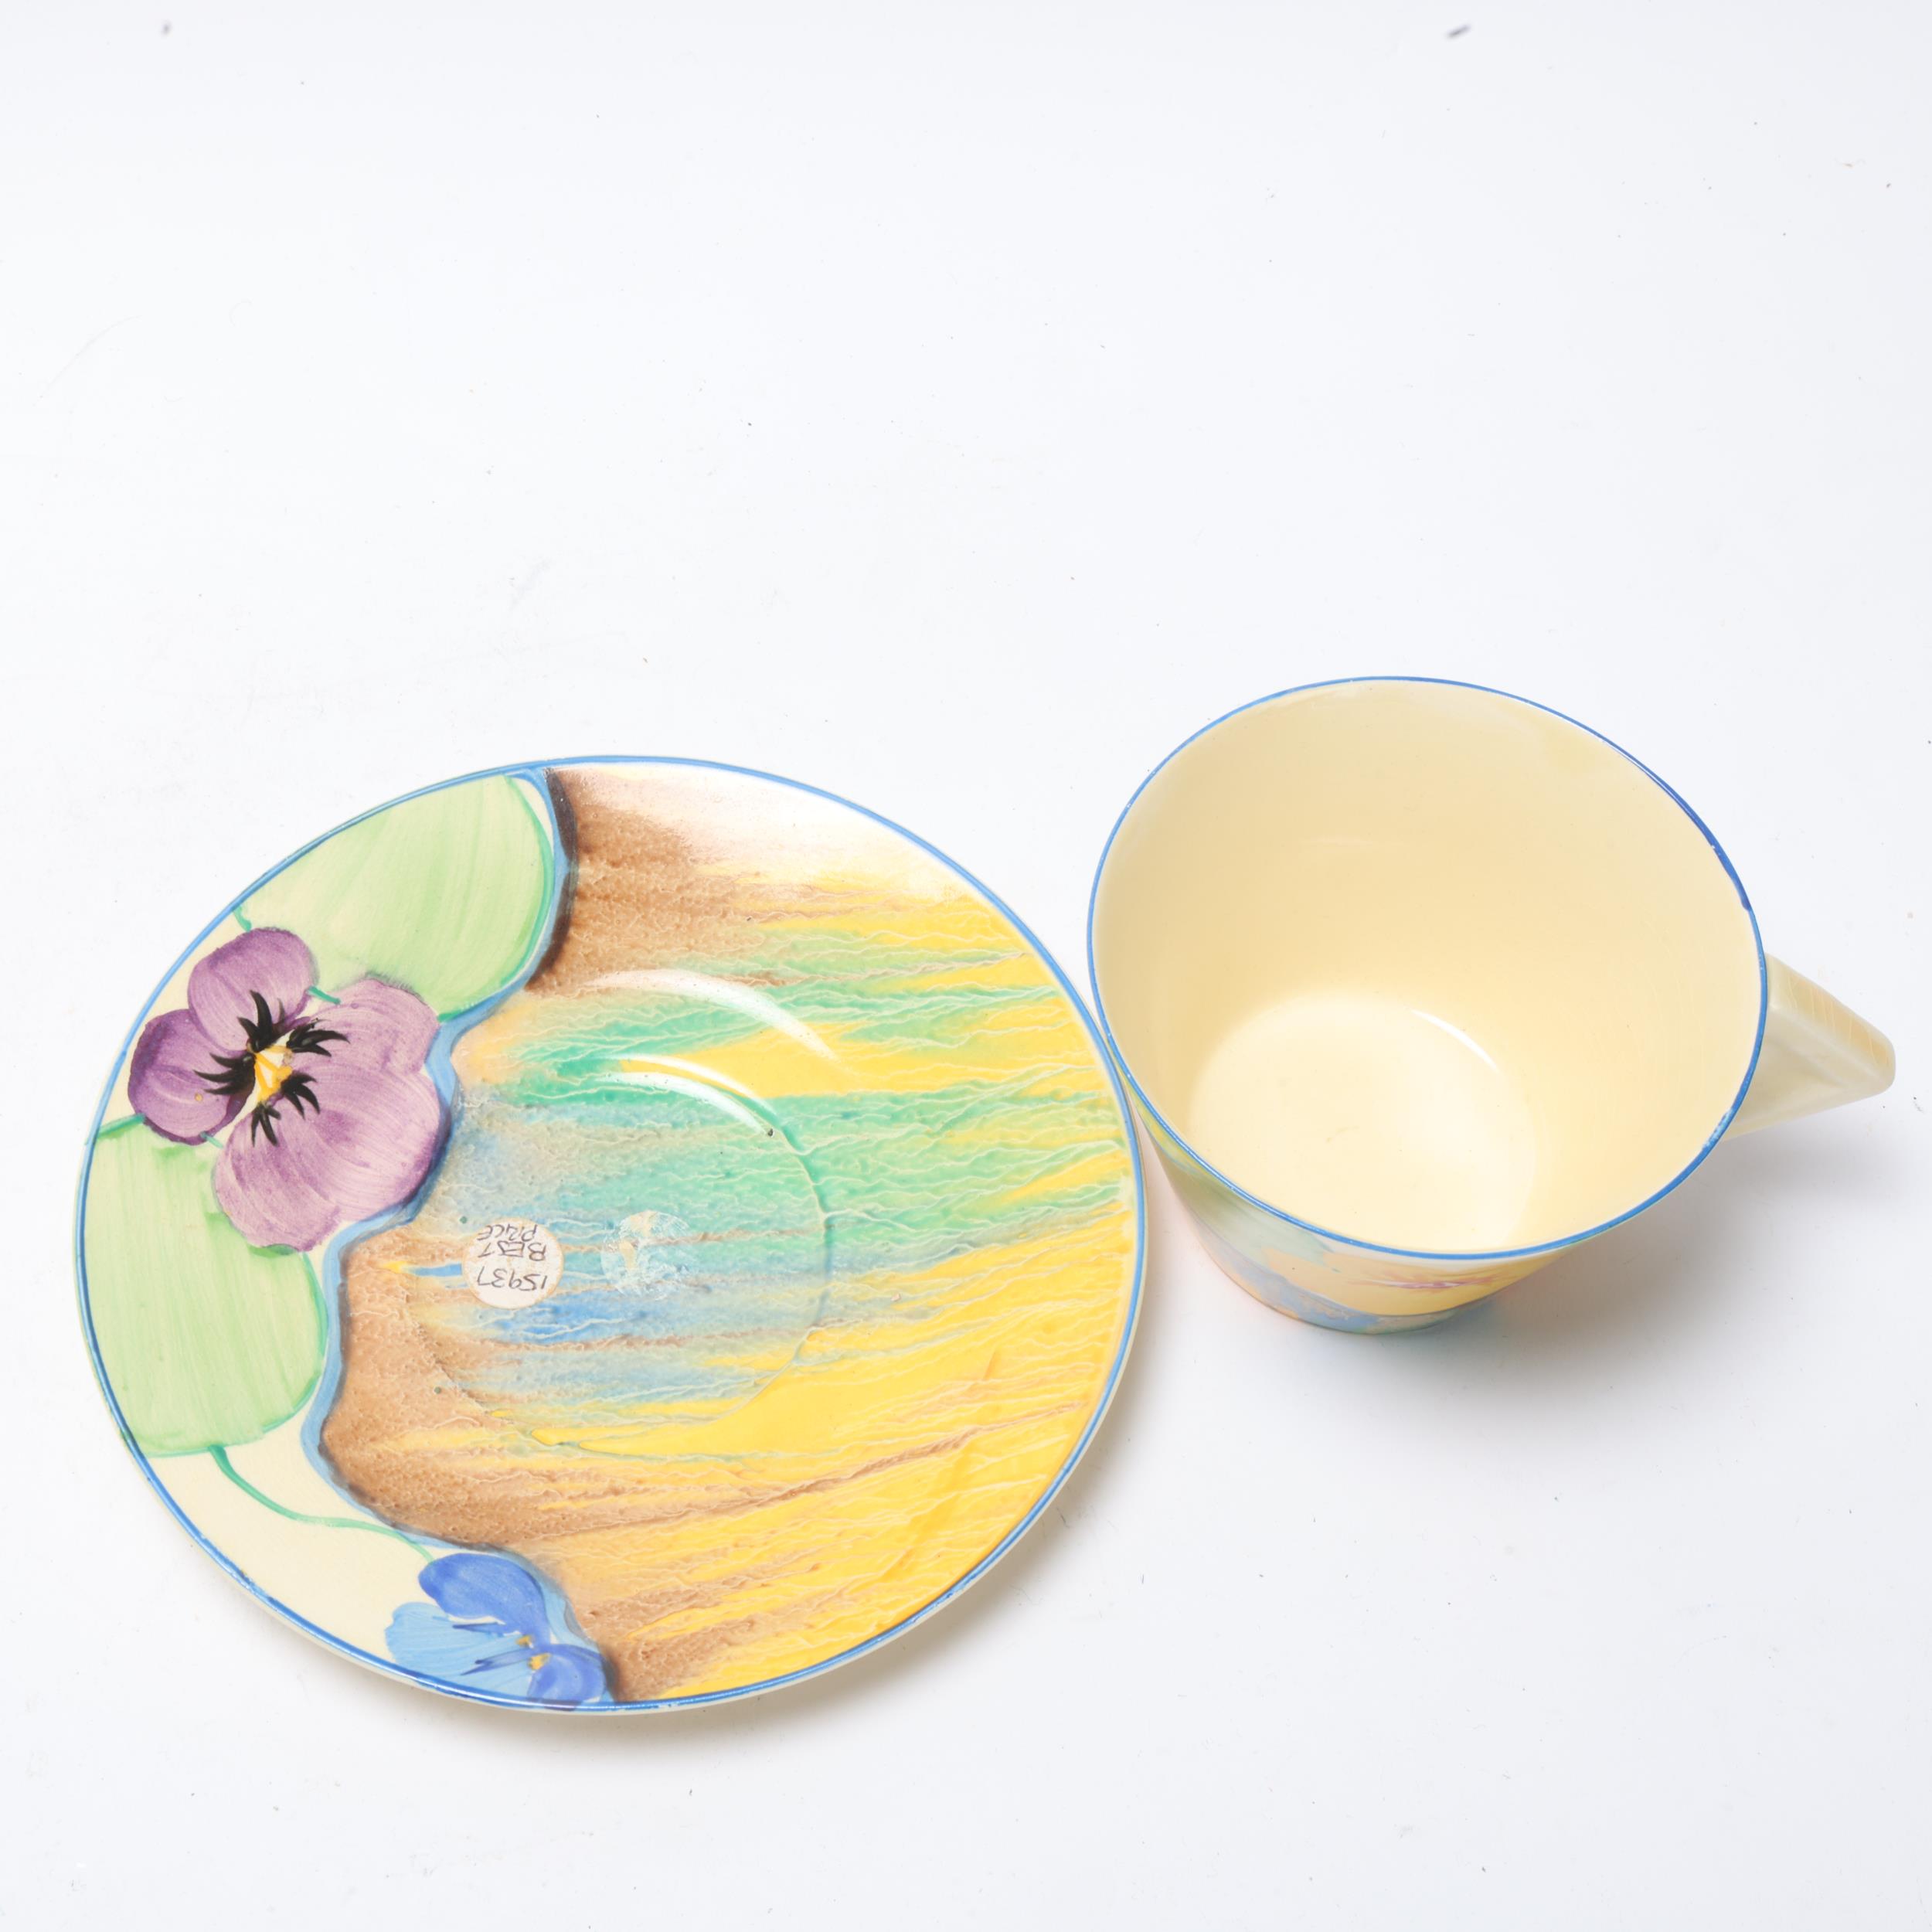 Clarice Cliff Delicia Pansies cup and saucer, saucer diameter 14.5cm Good condition, no chips cracks - Image 3 of 3